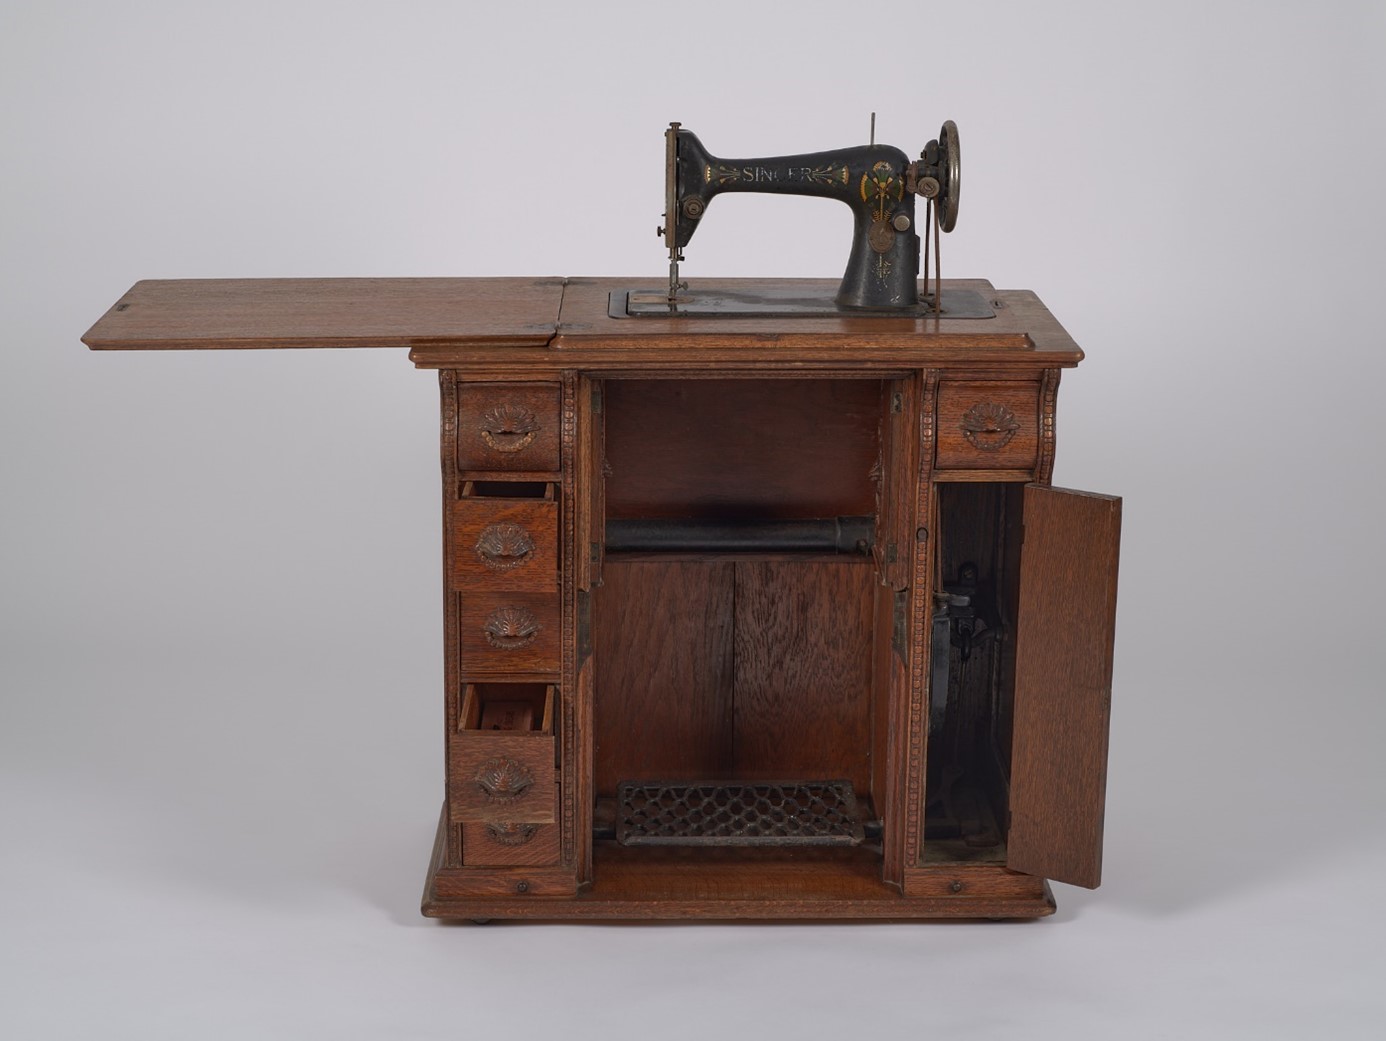 Laura Miller’s personal sewing machine.